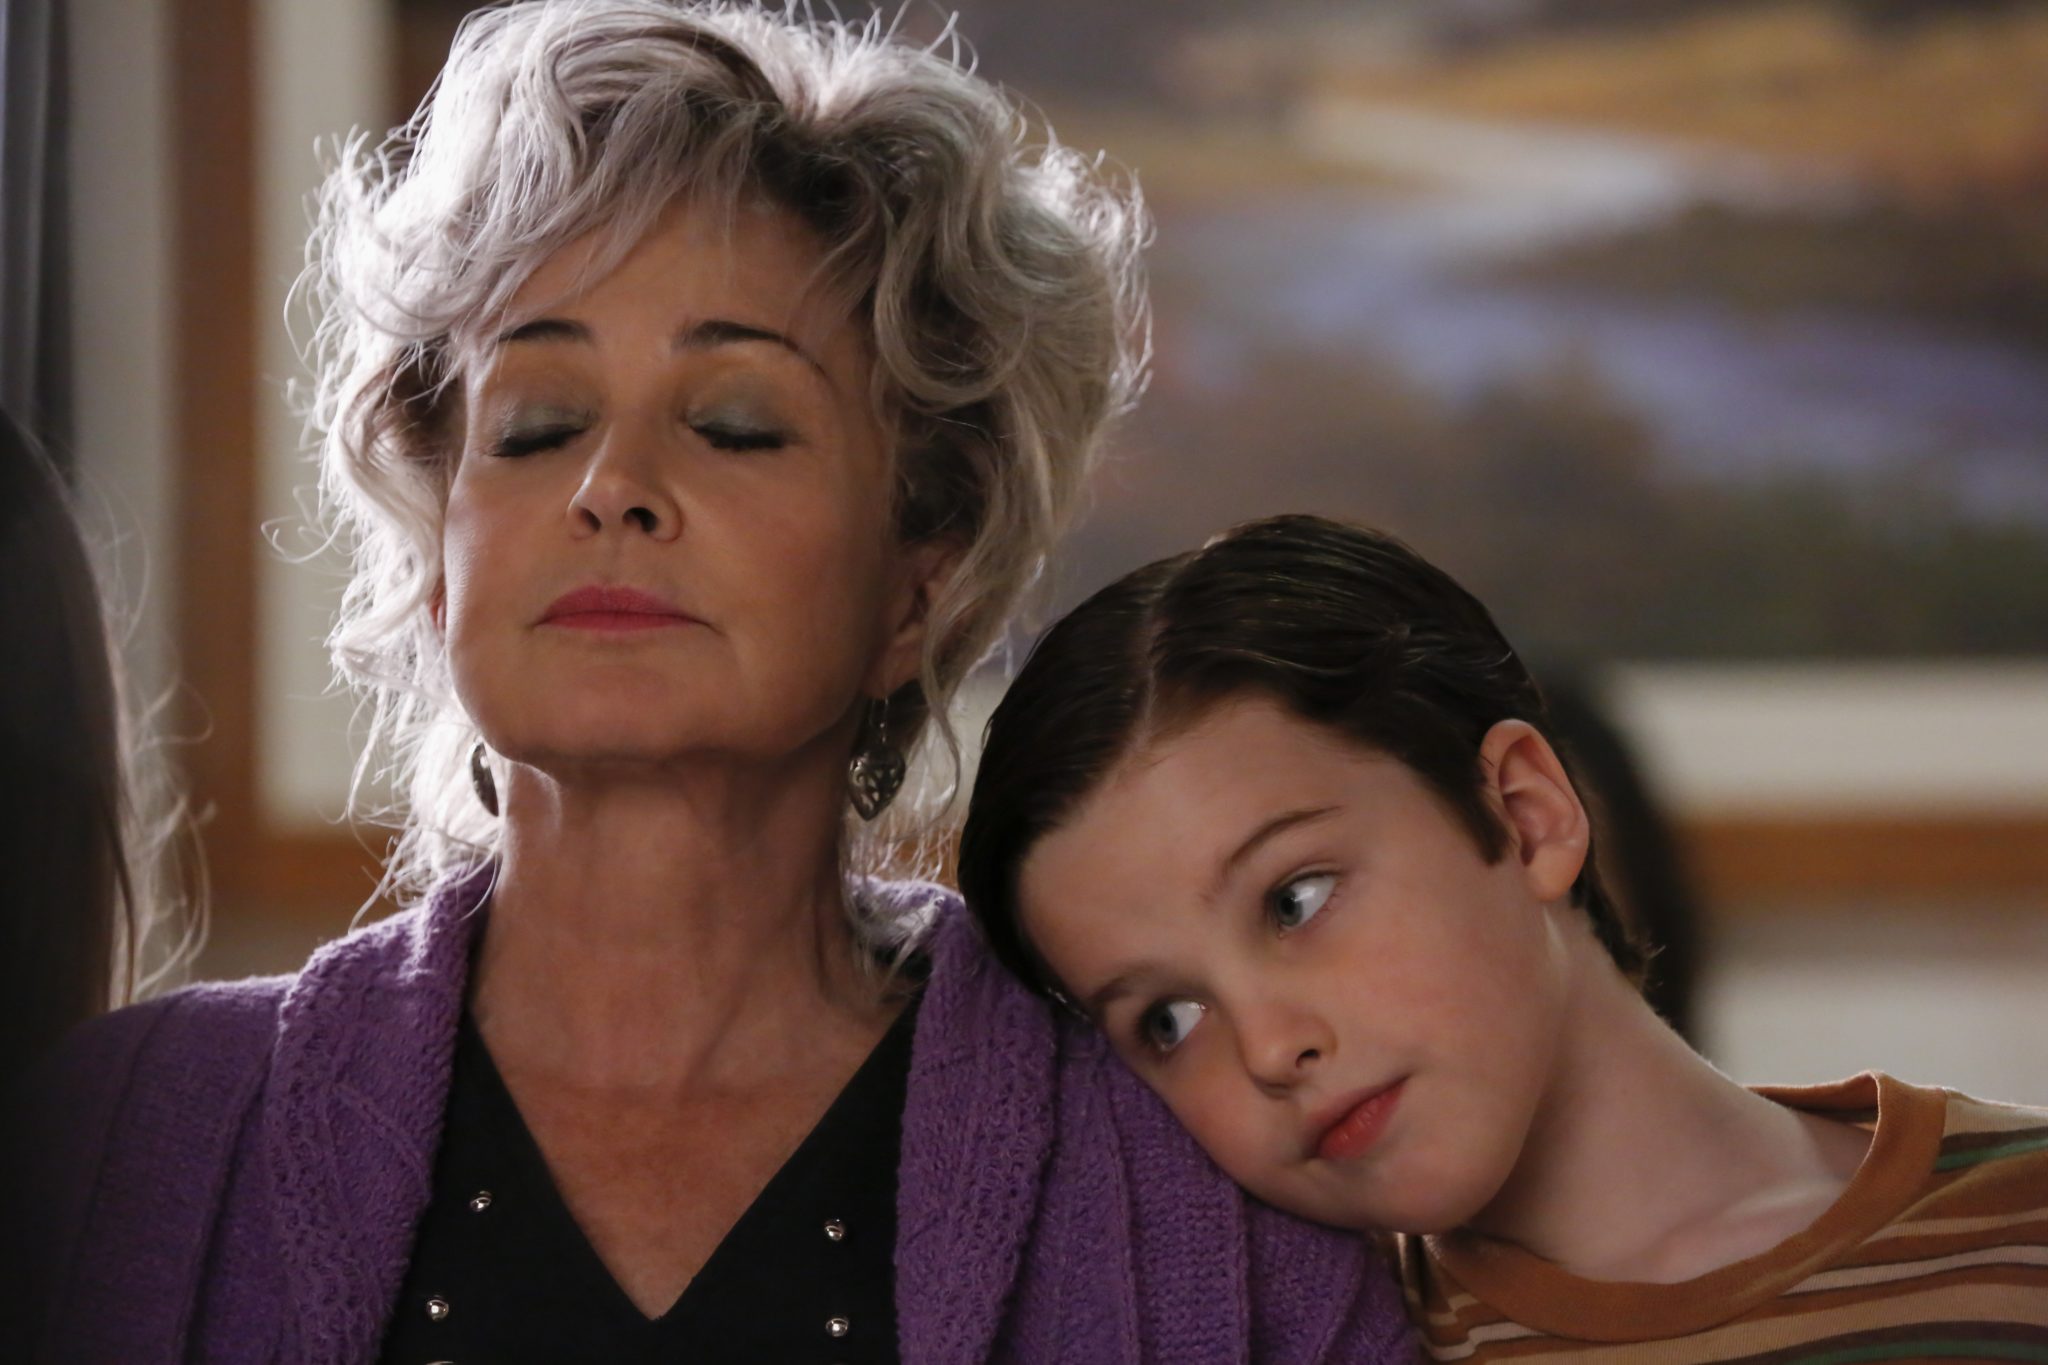 In an all-new episode, catch the debut of Young Meemaw on Young Sheldon